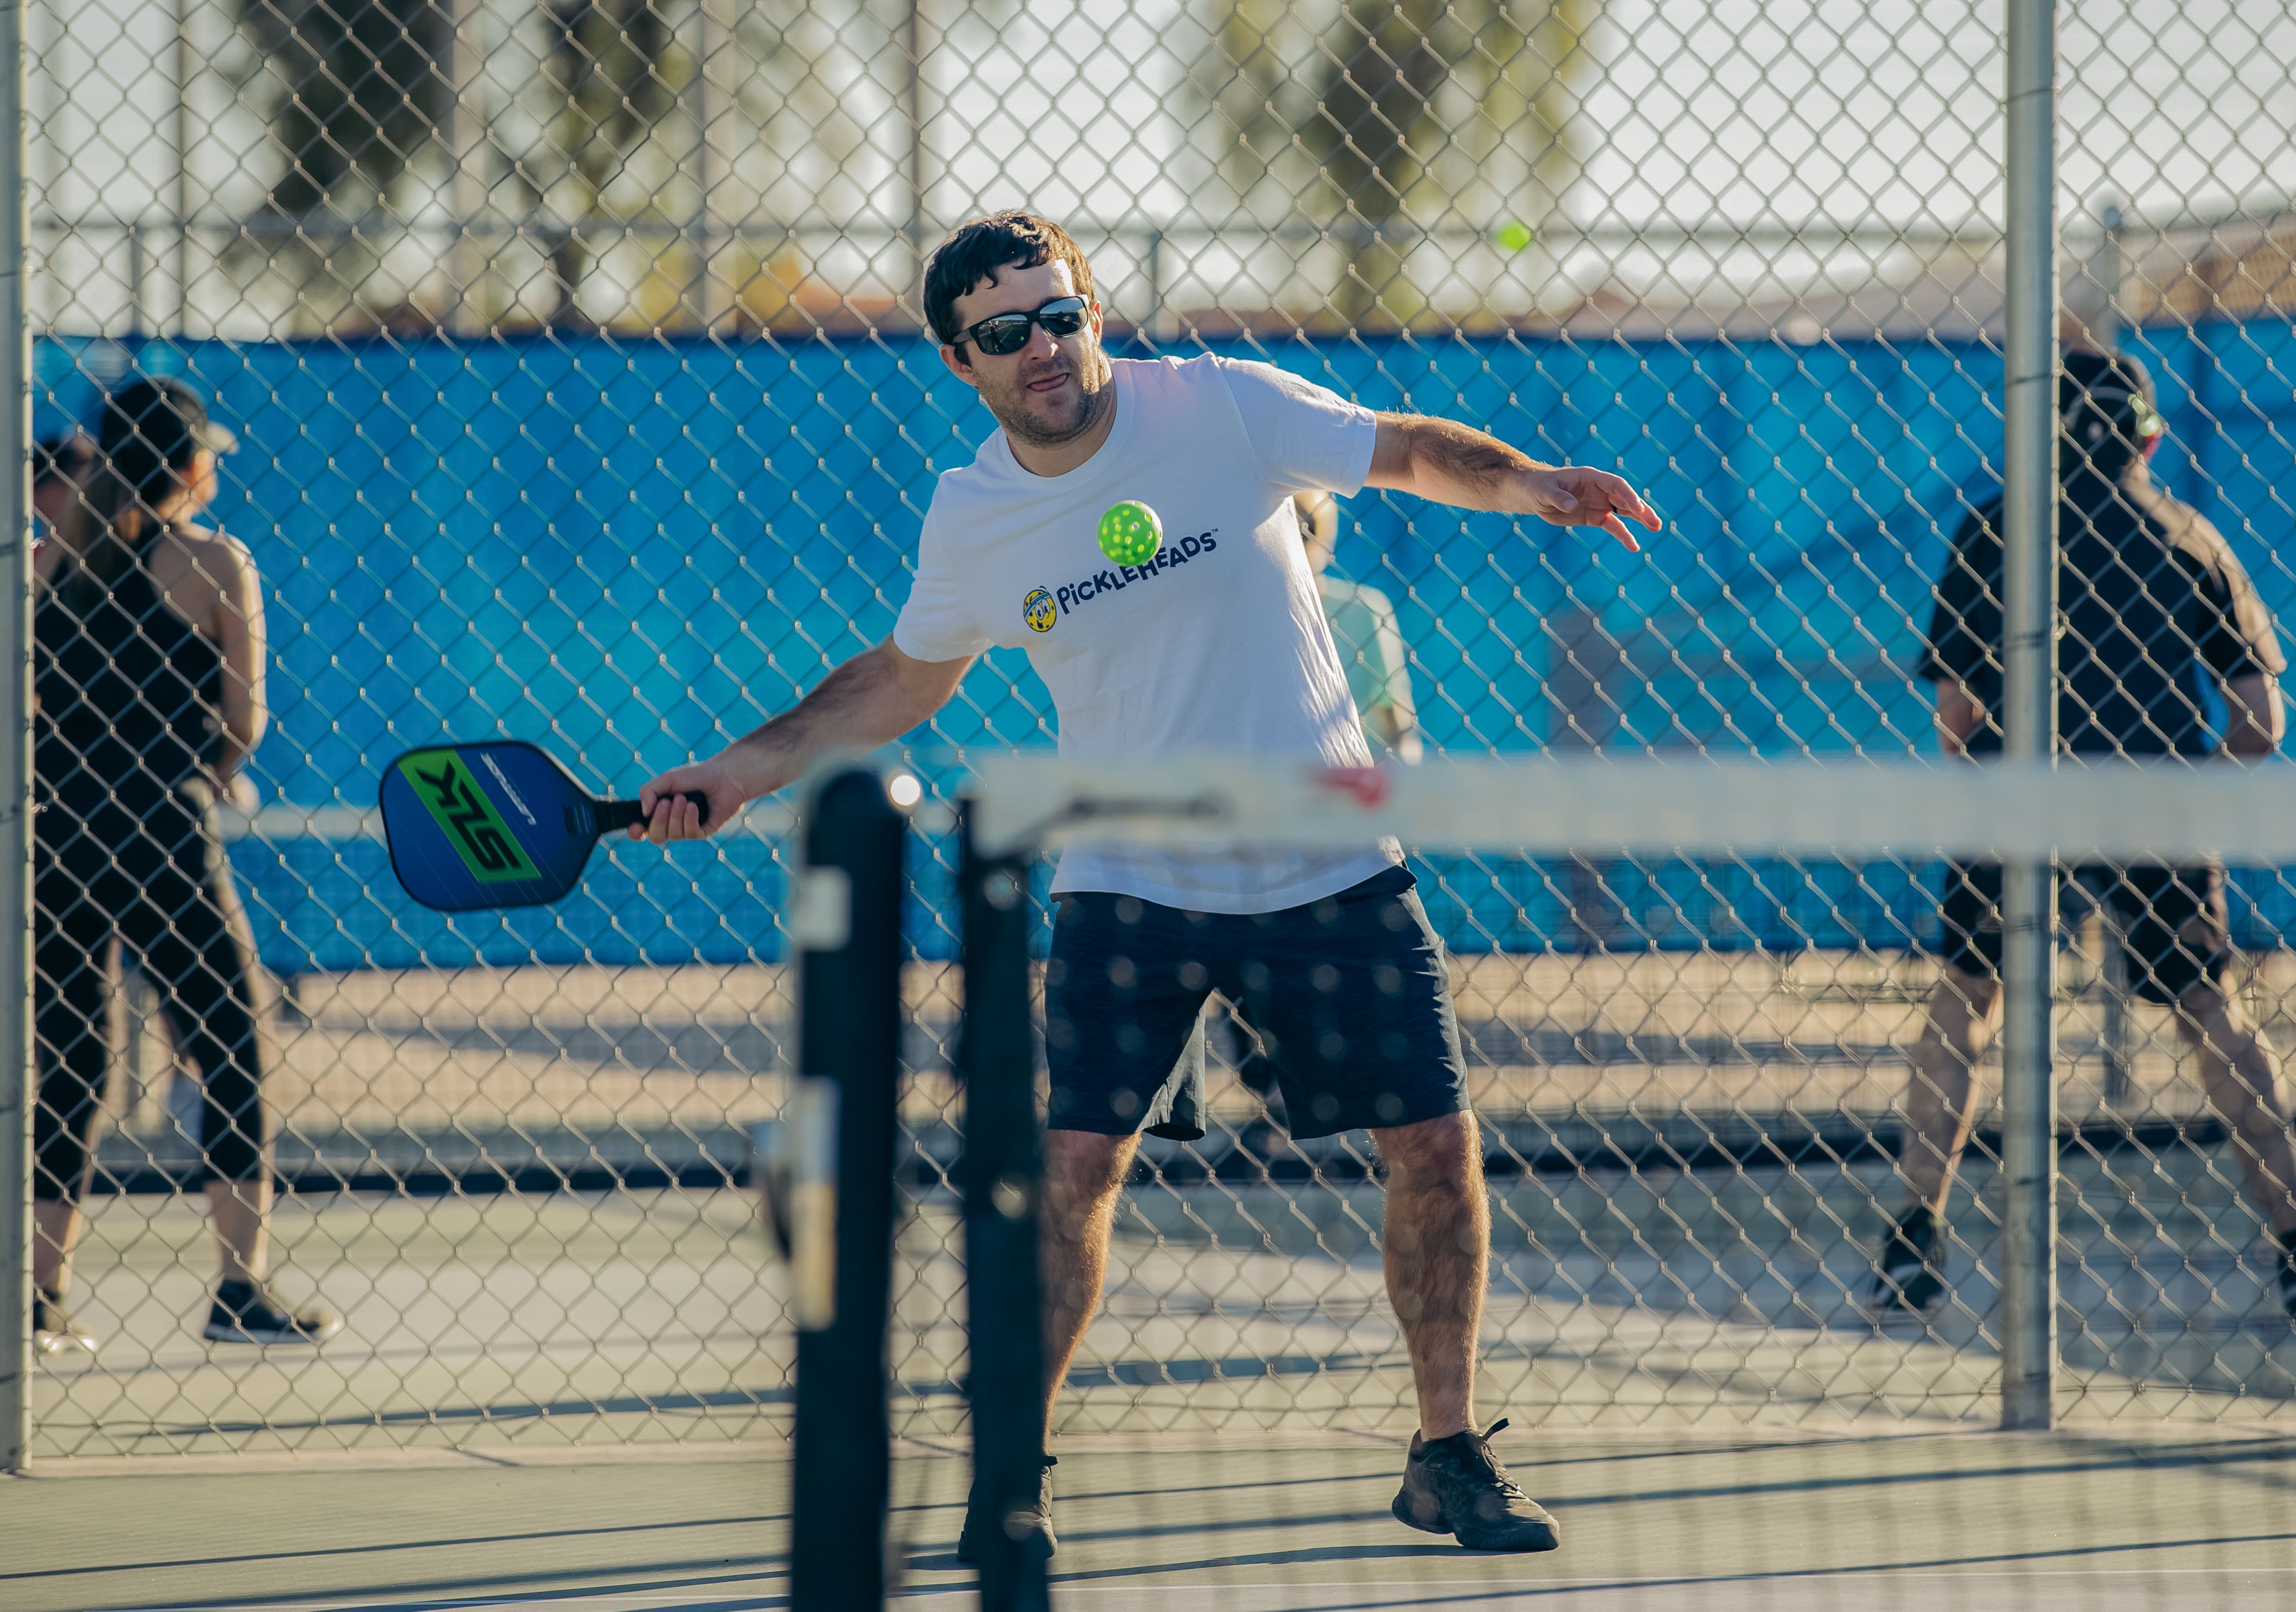 Player concentrates on a shot during a pickleball game